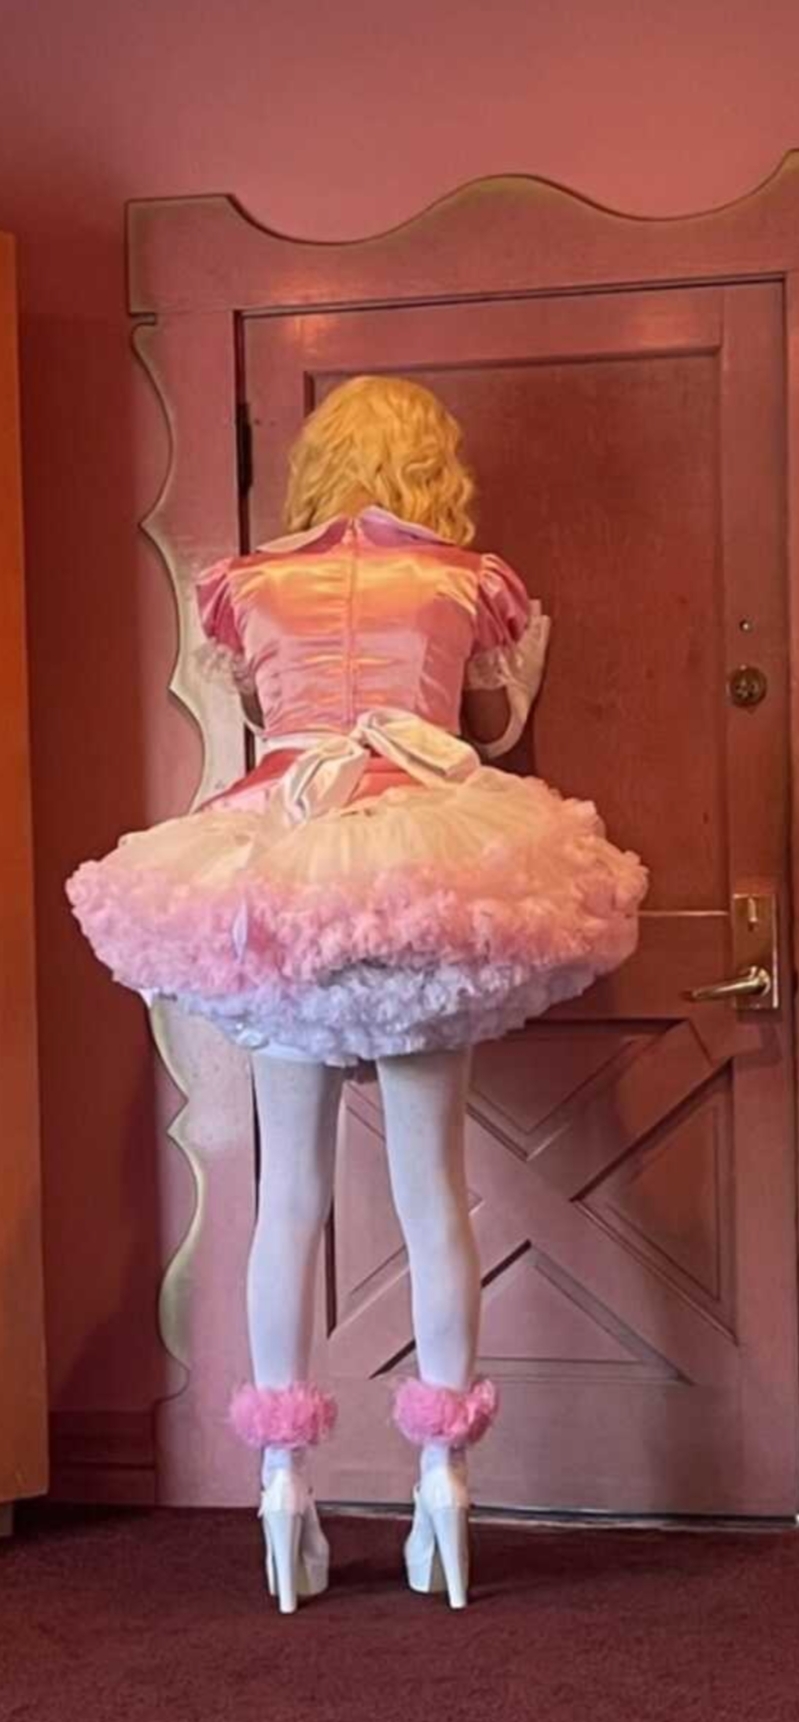 Mirror 🪞 Mirror on the wall, Who’s the prettiest sissy with the biggest balls 🤣😂🤣??